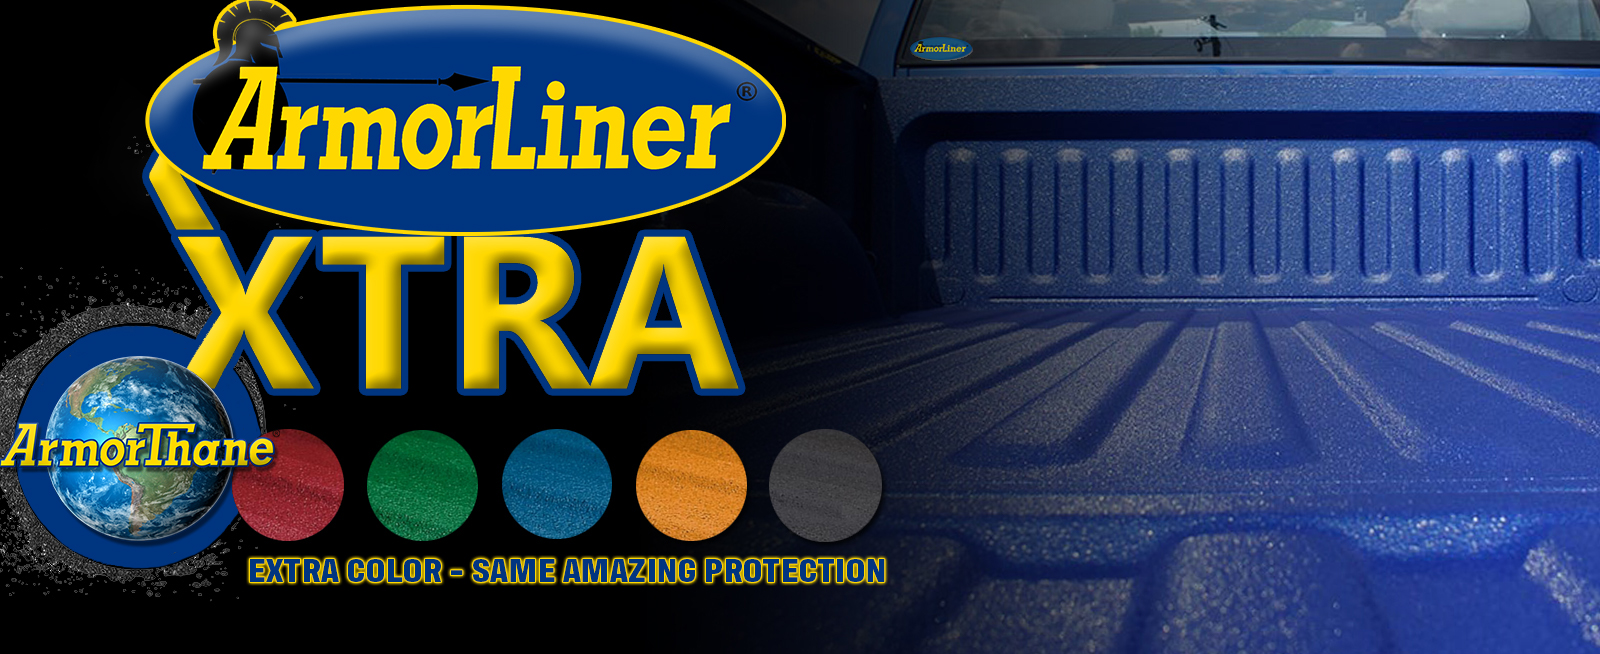 Make Your ArmorLiner Bedliner Stand Out Xtra With Color Match